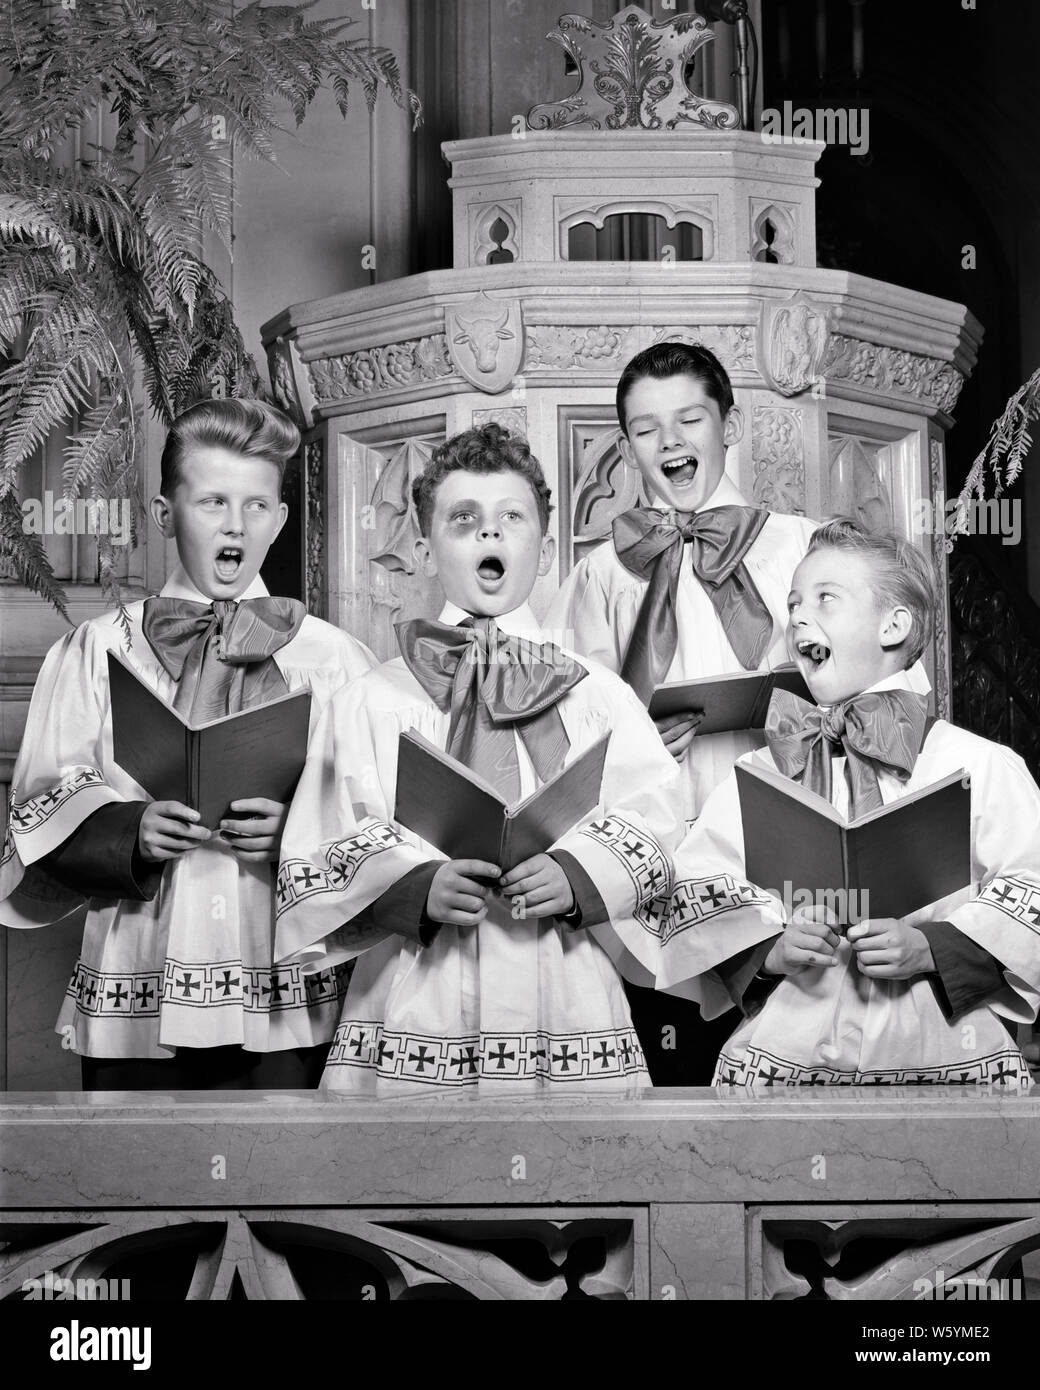 1940s THREE SINGING SMILING INNOCENT CHOIRBOYS EYING FOURTH GUILTY BOY STANDING IN MIDDLE WITH BIG BLACK EYE LOOKING AT CAMERA - c2811 HAR001 HARS TEAMWORK COMPETITION PLEASED JOY LIFESTYLE SATISFACTION RELIGION CELEBRATION HEALTHINESS COPY SPACE FRIENDSHIP HALF-LENGTH INSPIRATION FOURTH MALES RISK SPIRITUALITY SKIN B&W EYE CONTACT PERFORMING ARTS VISION TEMPTATION CHEERFUL ADVENTURE STRENGTH COURAGE POWERFUL IN SMILES BLACK EYE SURROUNDING CONCEPTUAL JOYFUL STYLISH BRUISE CHOIRBOY CHOIRBOYS GROWTH GUILTY HONORABLE JUVENILES PRE-TEEN PRE-TEEN BOY SHINER SOLUTIONS SOMEONE TOGETHERNESS Stock Photo